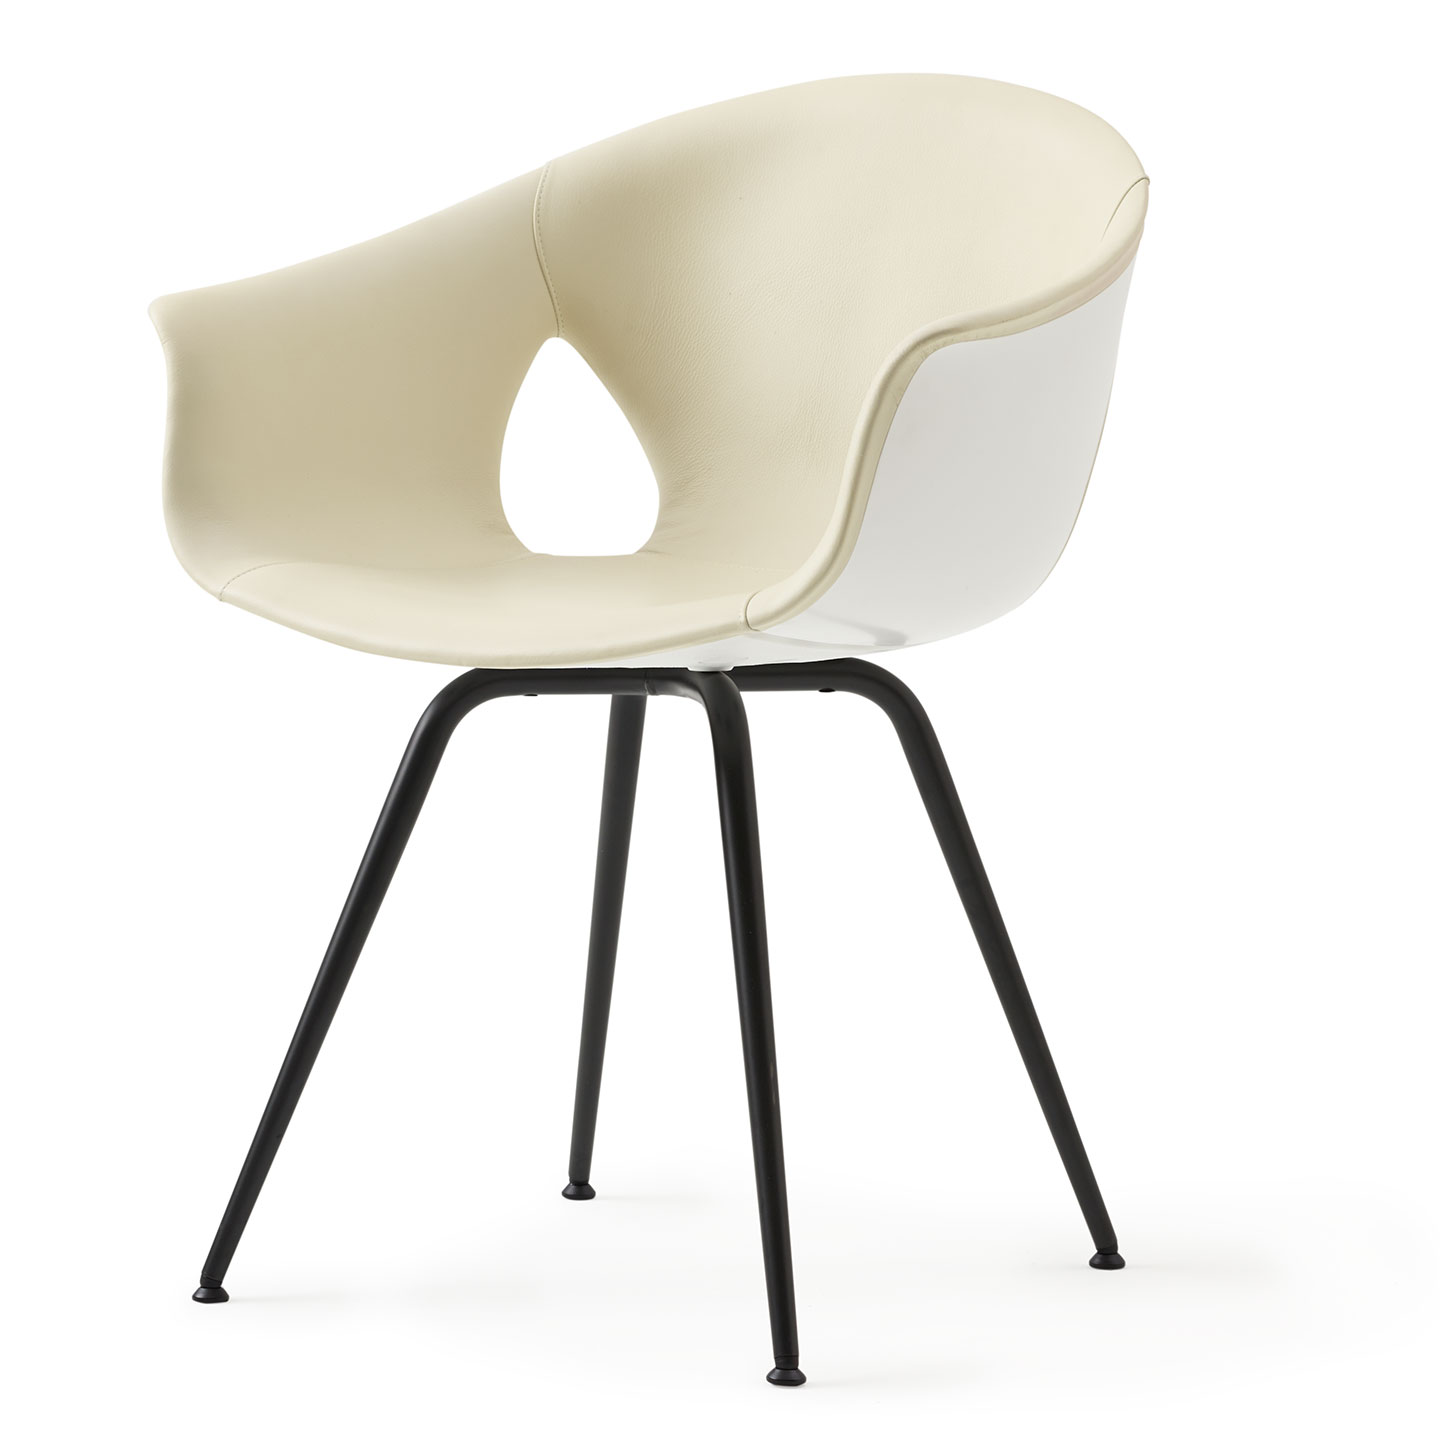 Haworth Ginger Ale chair in white leather and metal legs in a side view